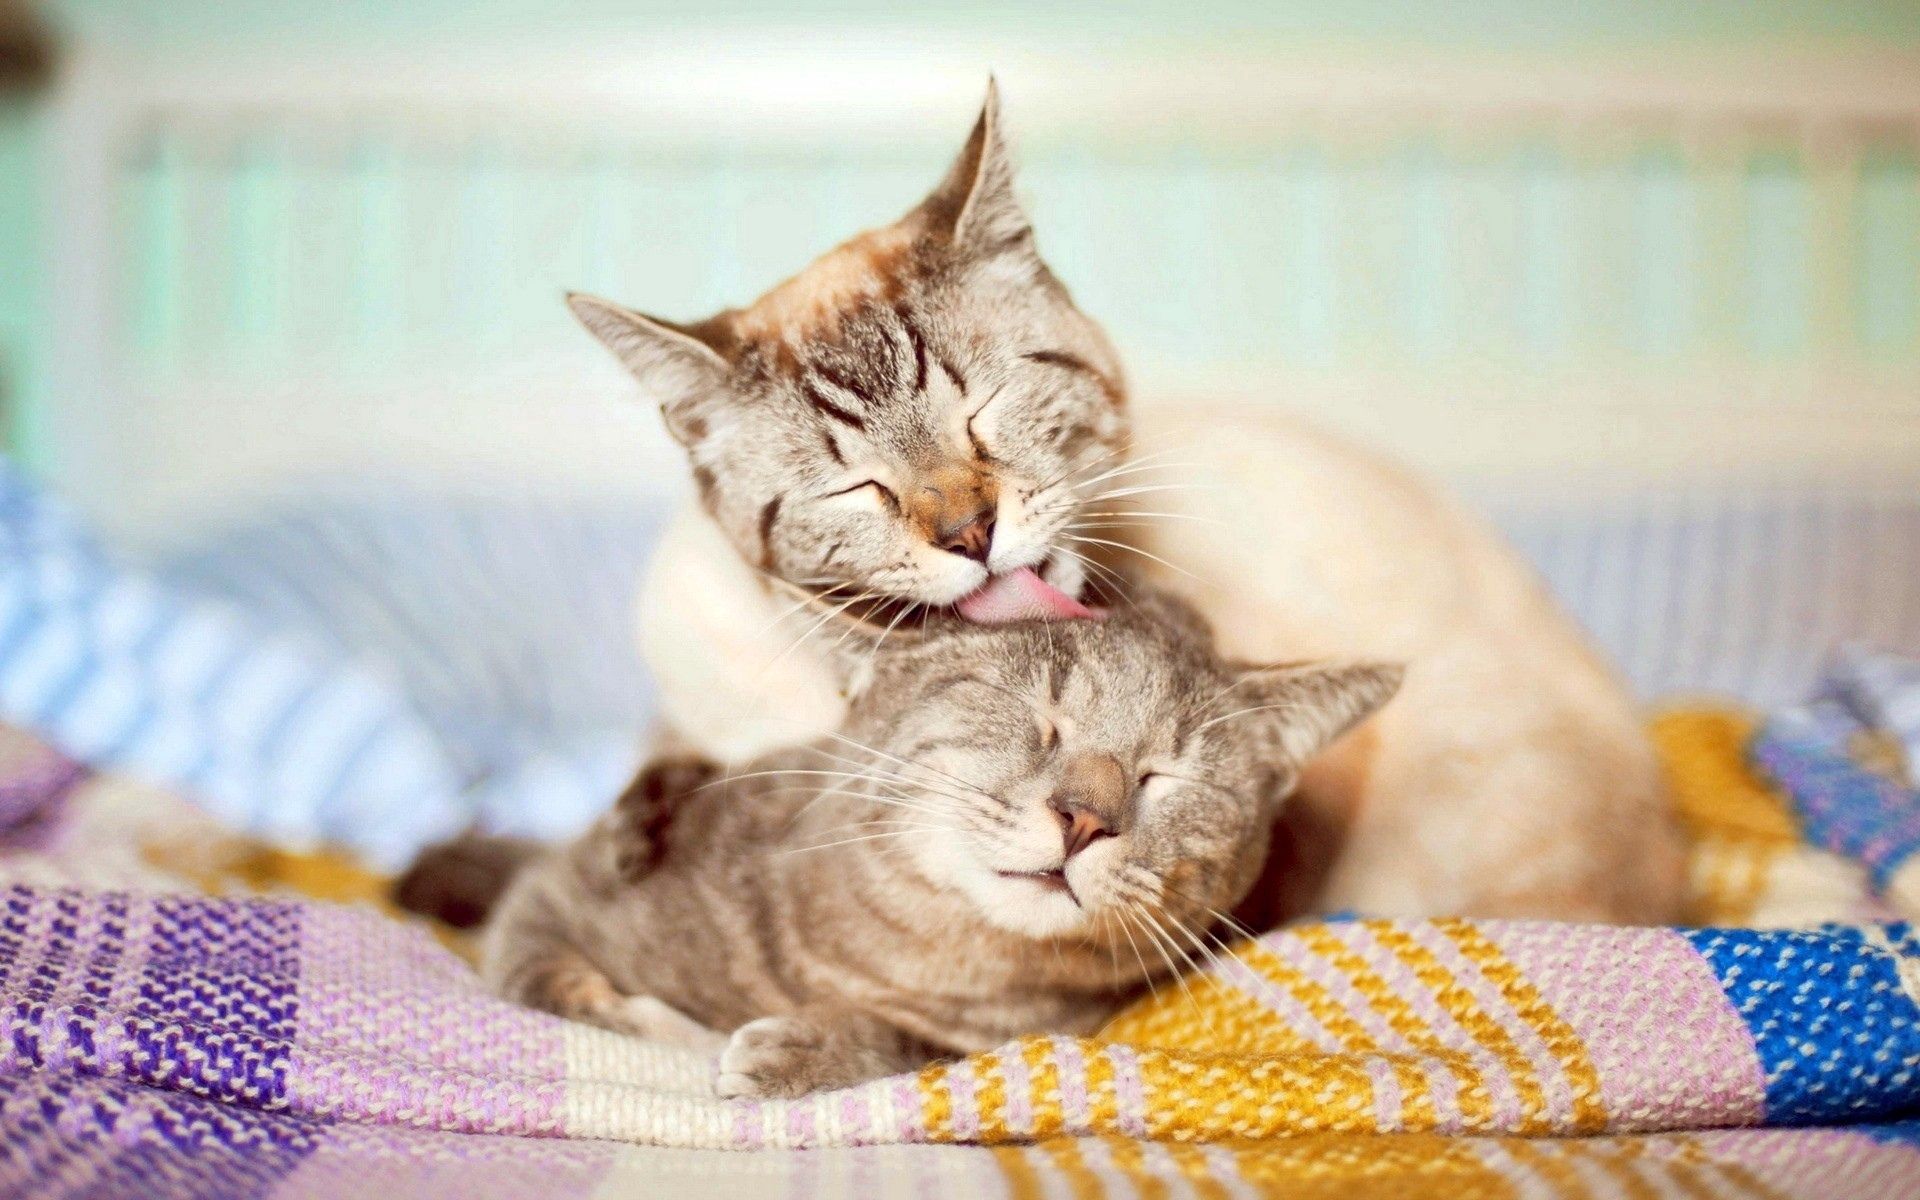 tenderness, cats, animals, couple, pair, care wallpaper for mobile